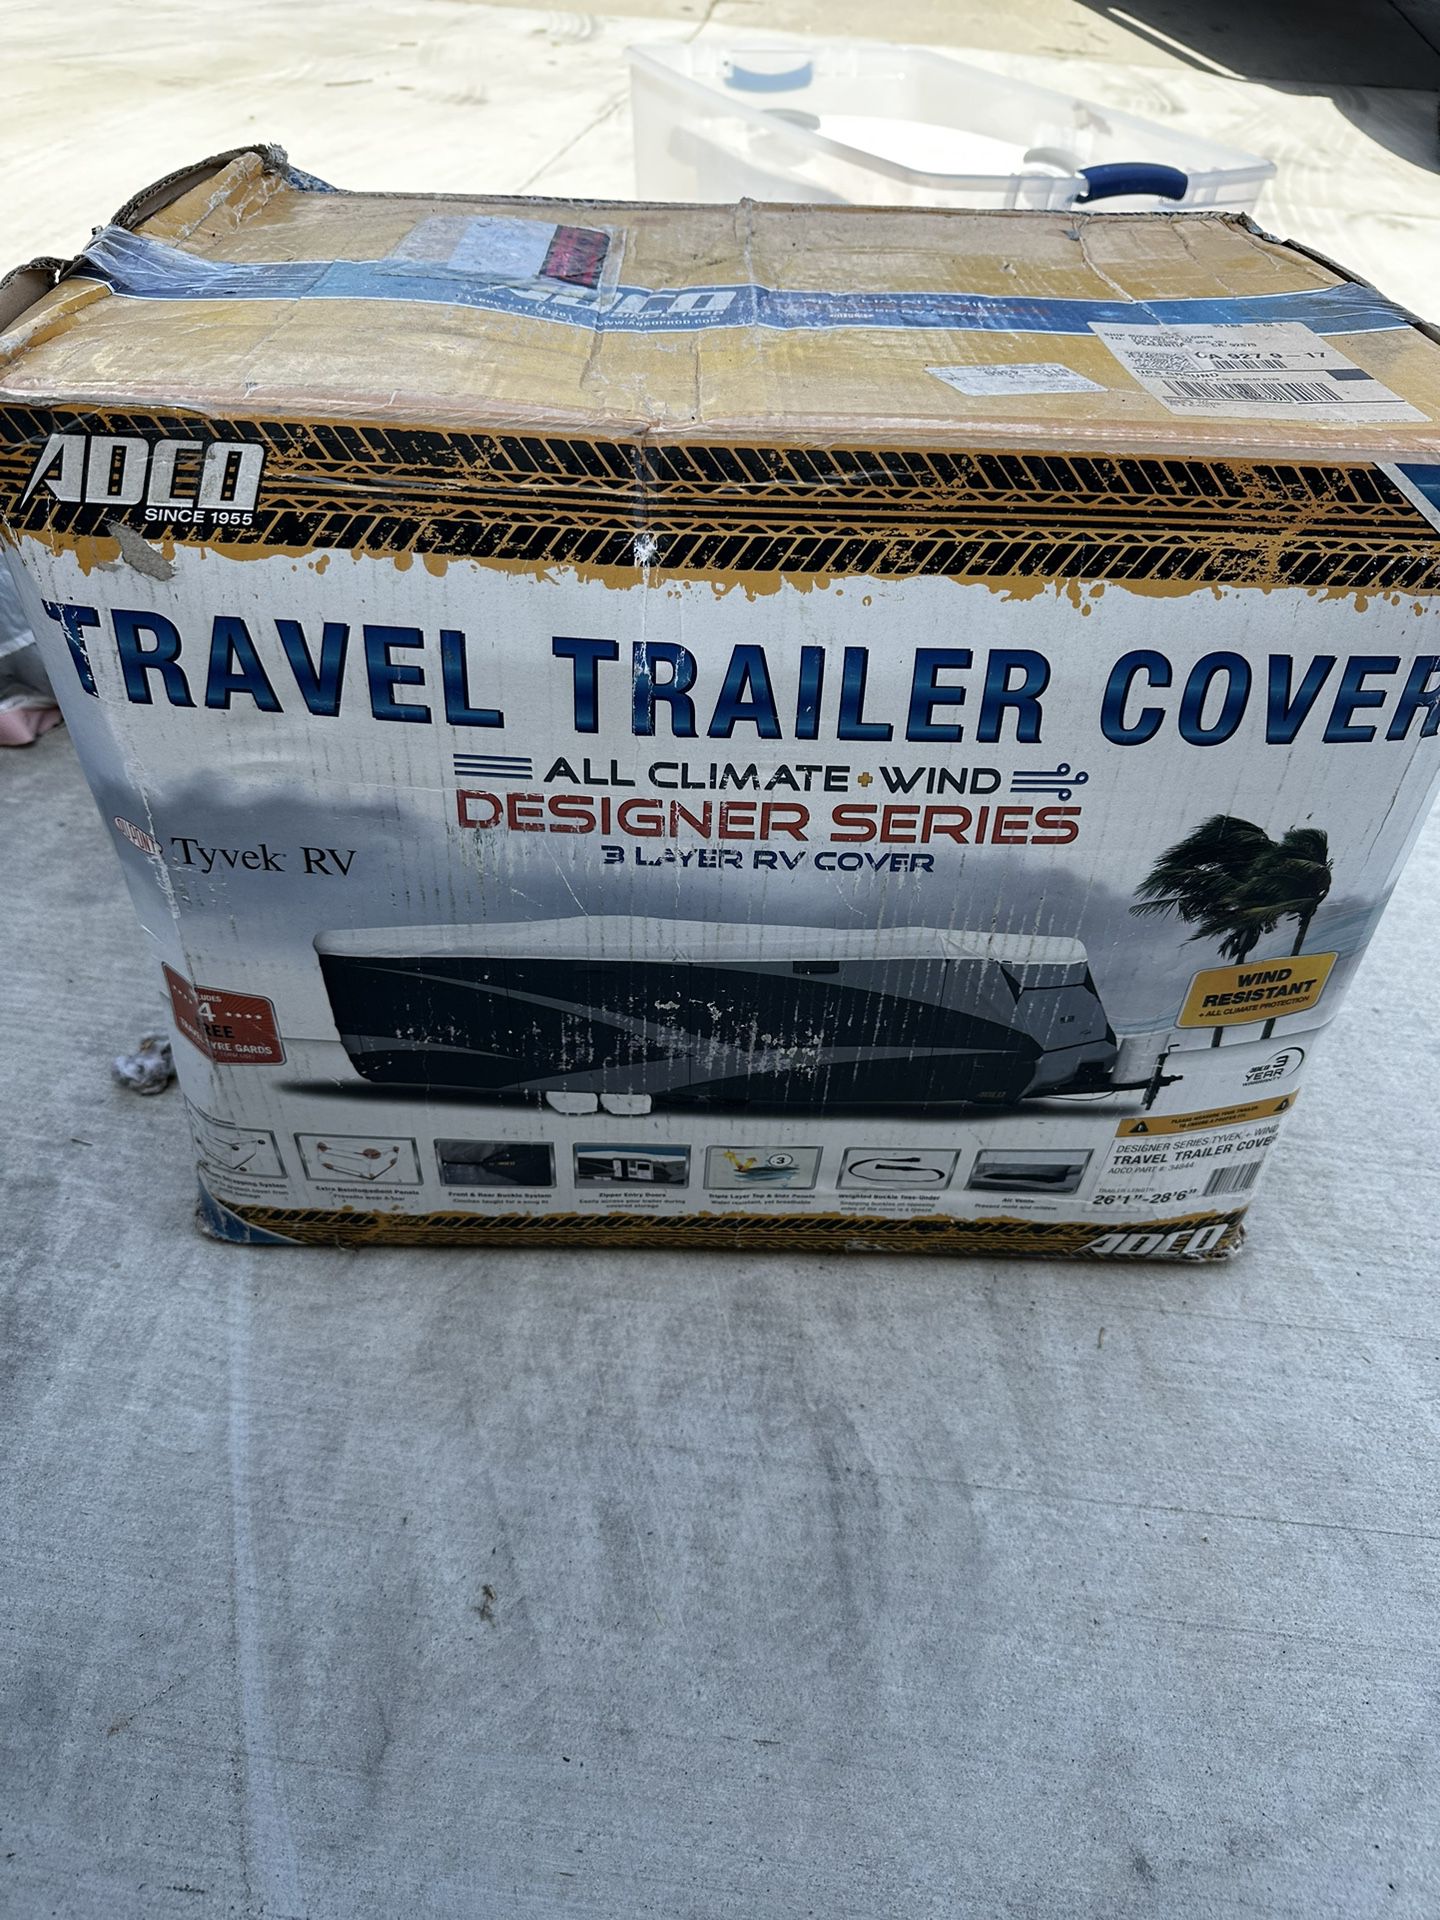 ADCO Travel Trailer Cover.  26-28 Foot